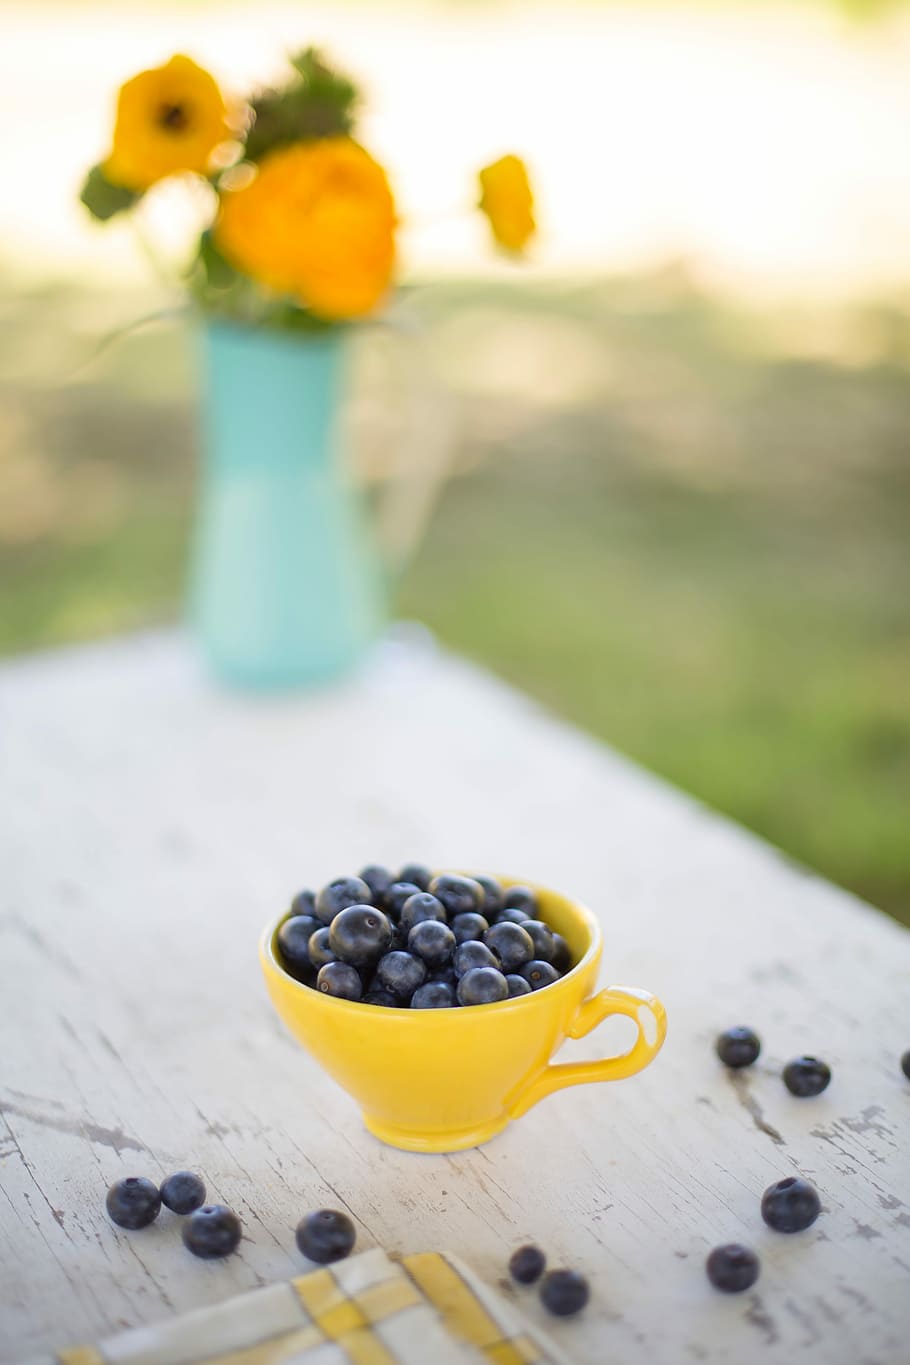 Blueberries, berries, berry, blueberry, breakfast, healthy, outdoor, table, cup, food